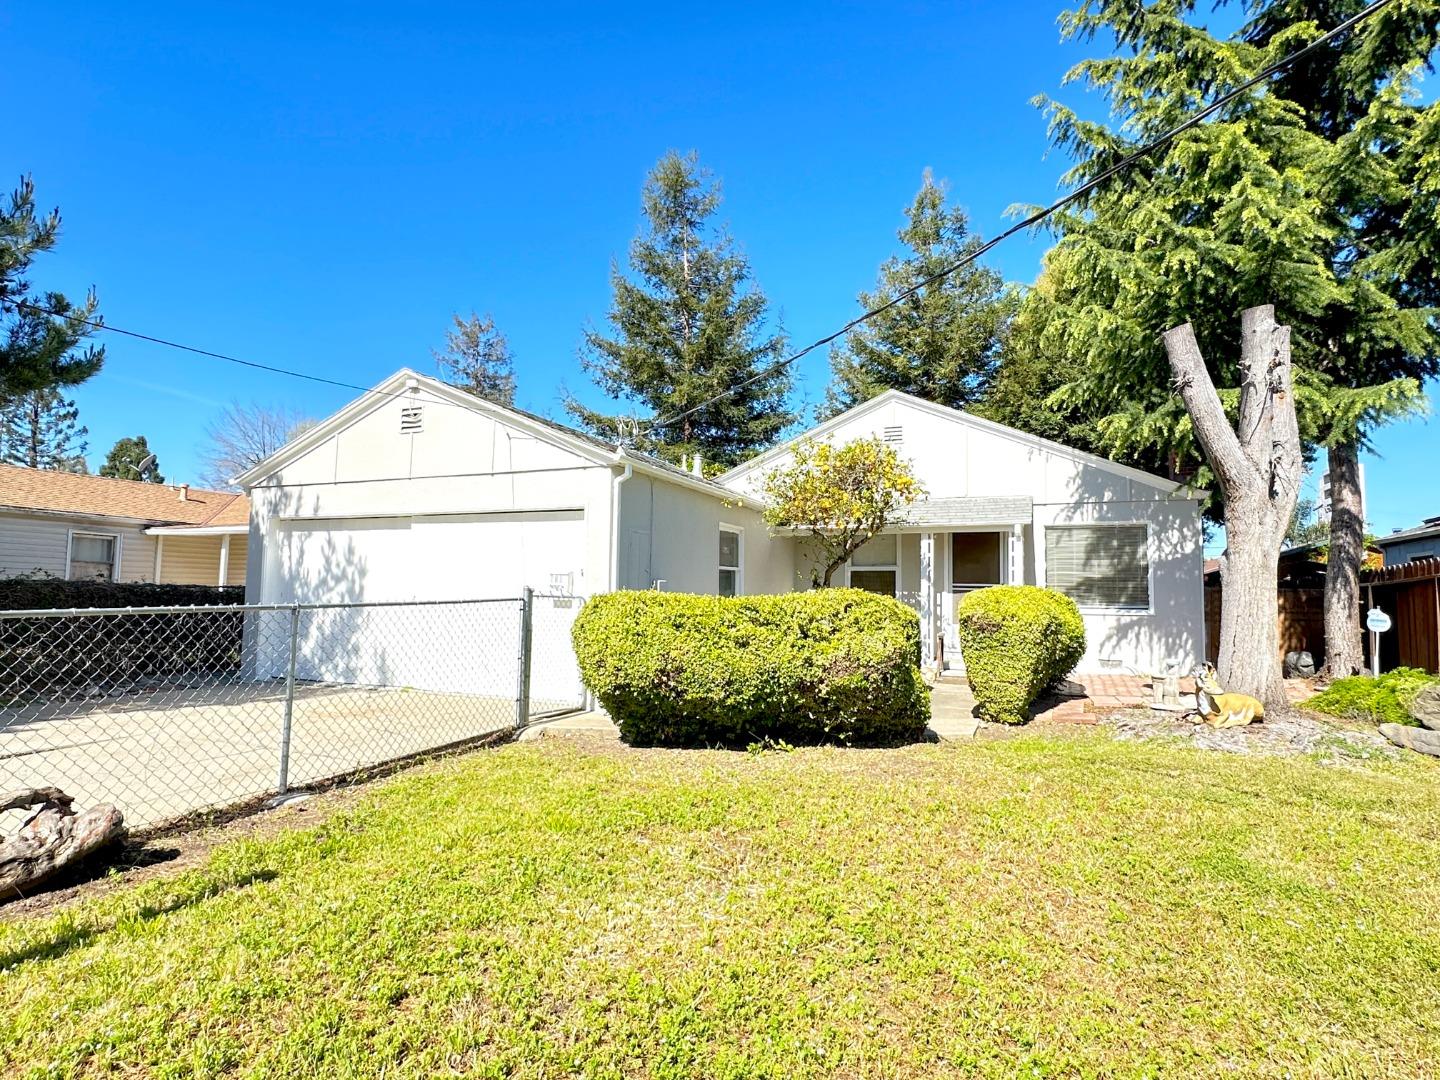 Photo of 783 8th Ave in Redwood City, CA